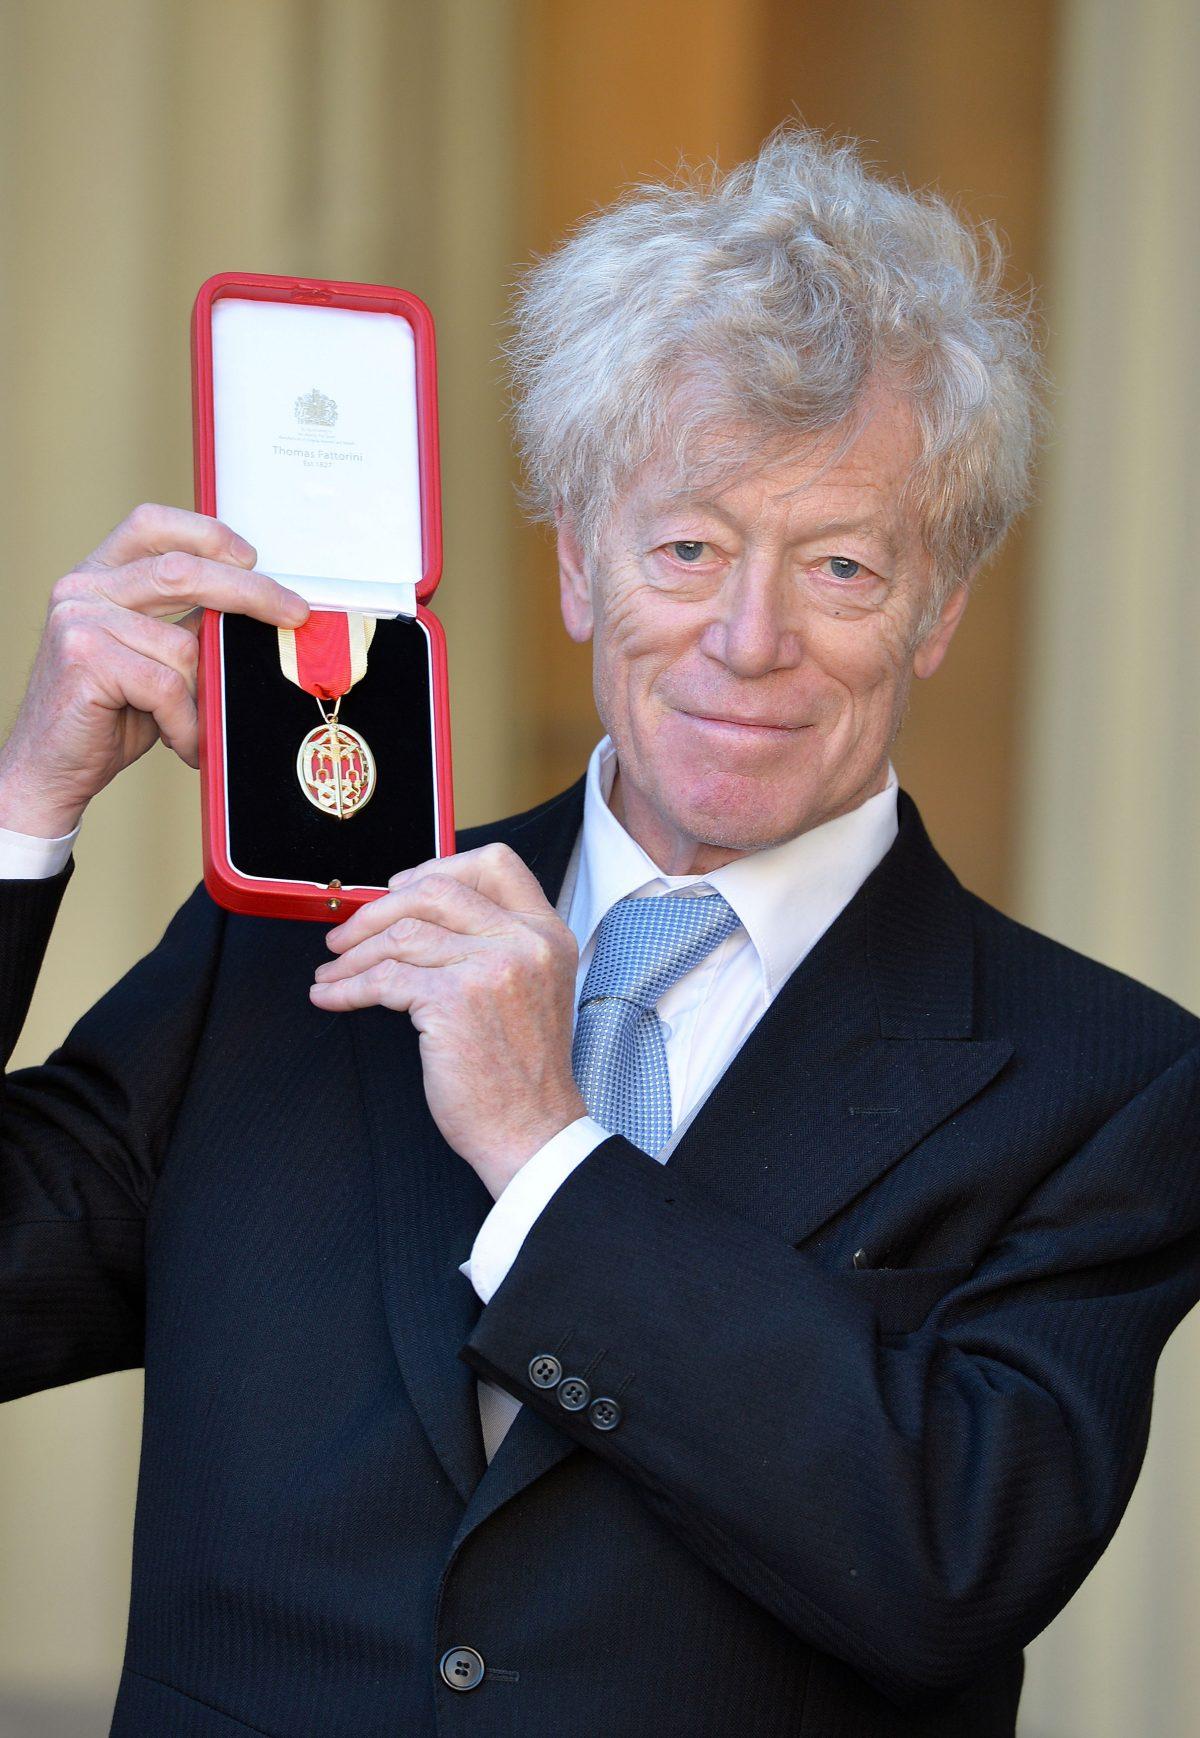 Sir Roger Scruton after he was knighted by the Prince of Wales during an investiture ceremony at Buckingham Palace in London on Nov. 25, 2016. (John Stillwell/Getty Images)